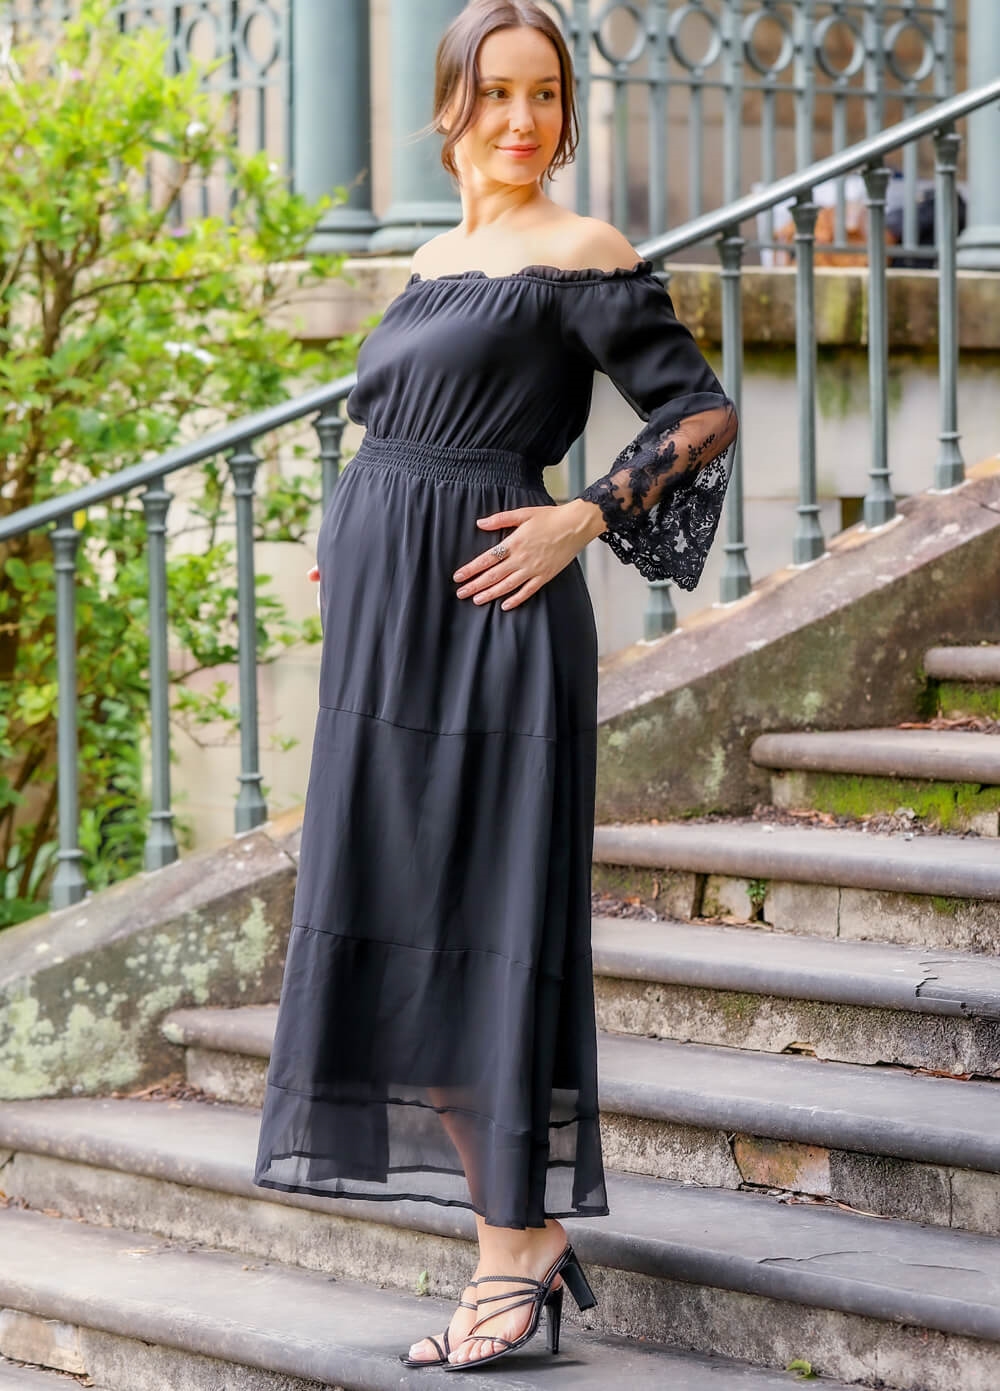 Lait & Co - Ruby-Grace Lace Sleeve Maternity Gown in Black